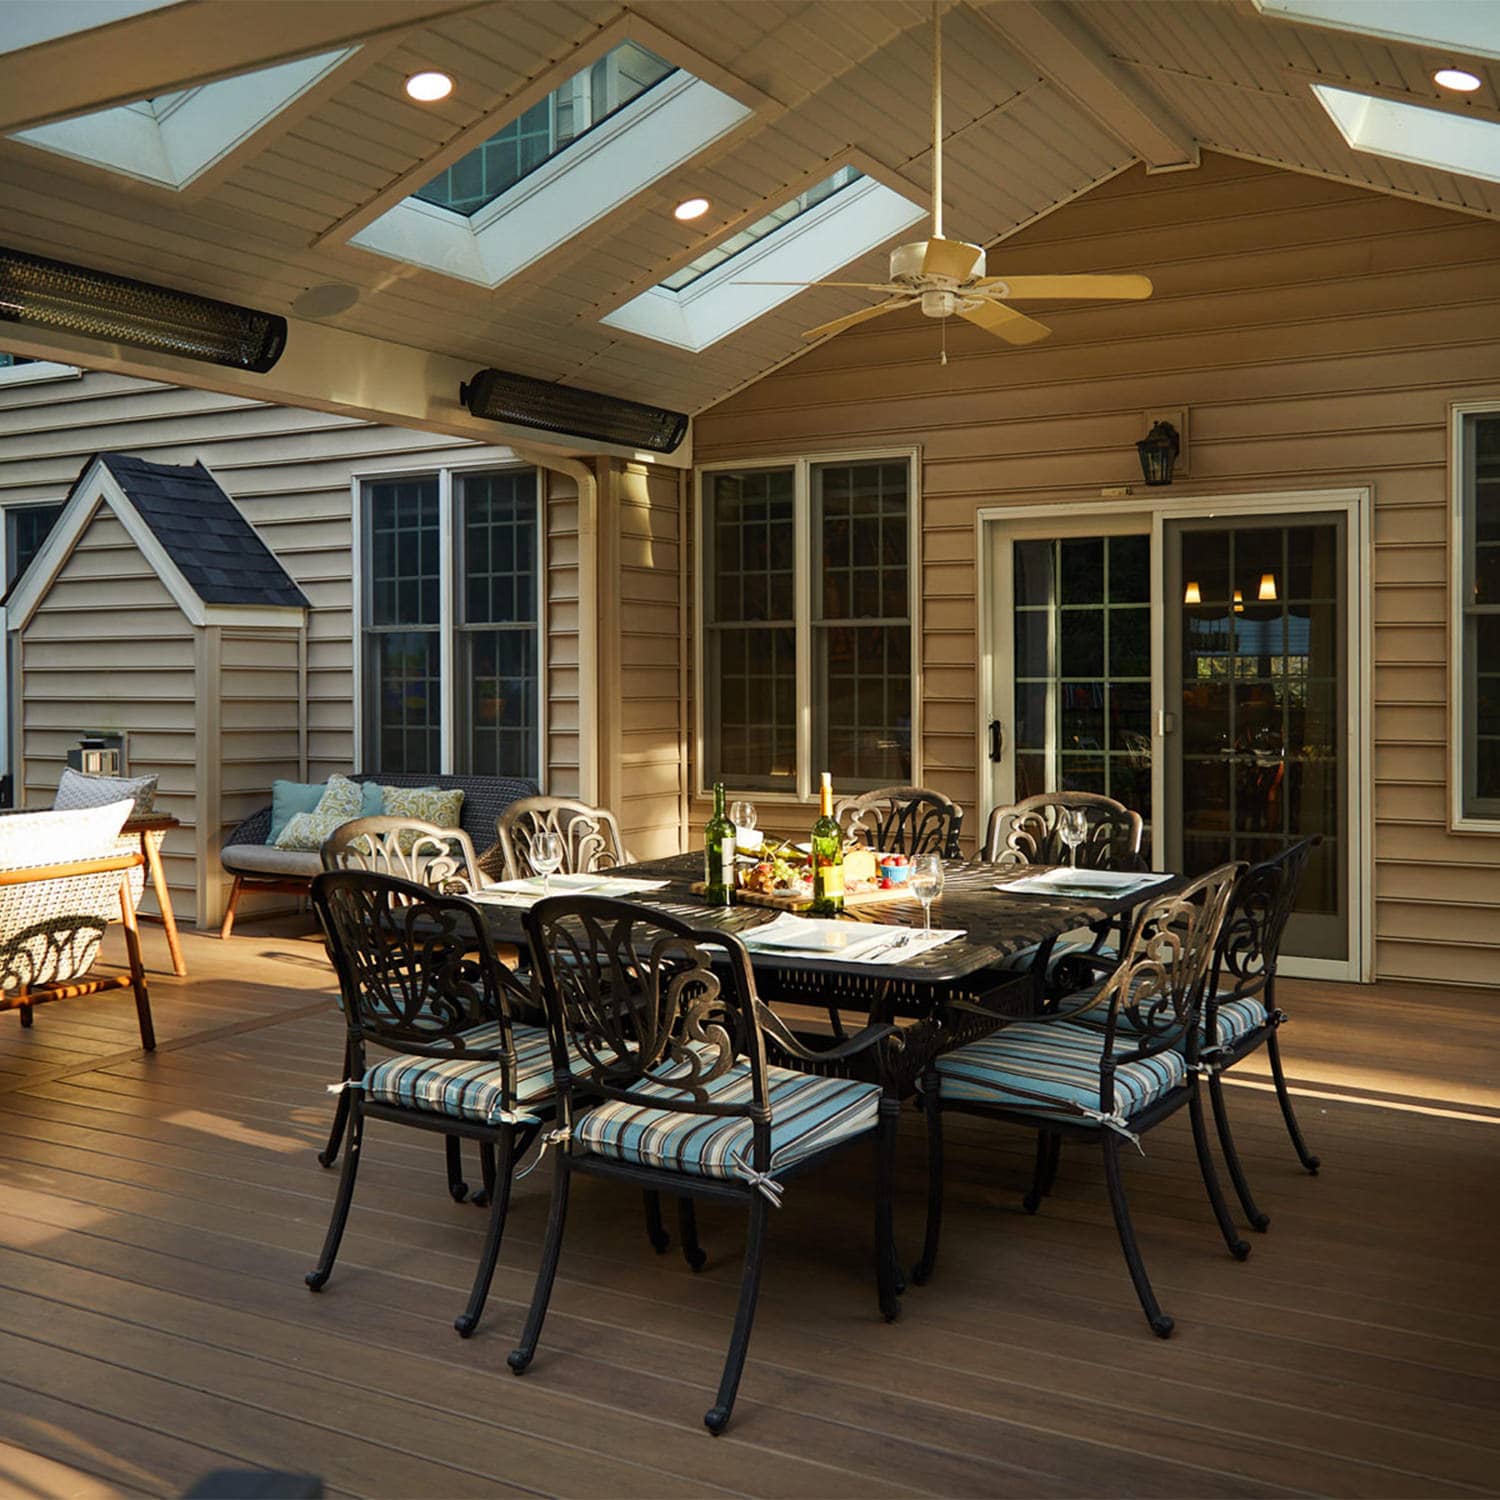 With an attached roof system, you can enjoy your outdoor living space no matter the weather! Bonus: opt for Bromic infrared heaters to extend your comfortability when there's a chill in the air!